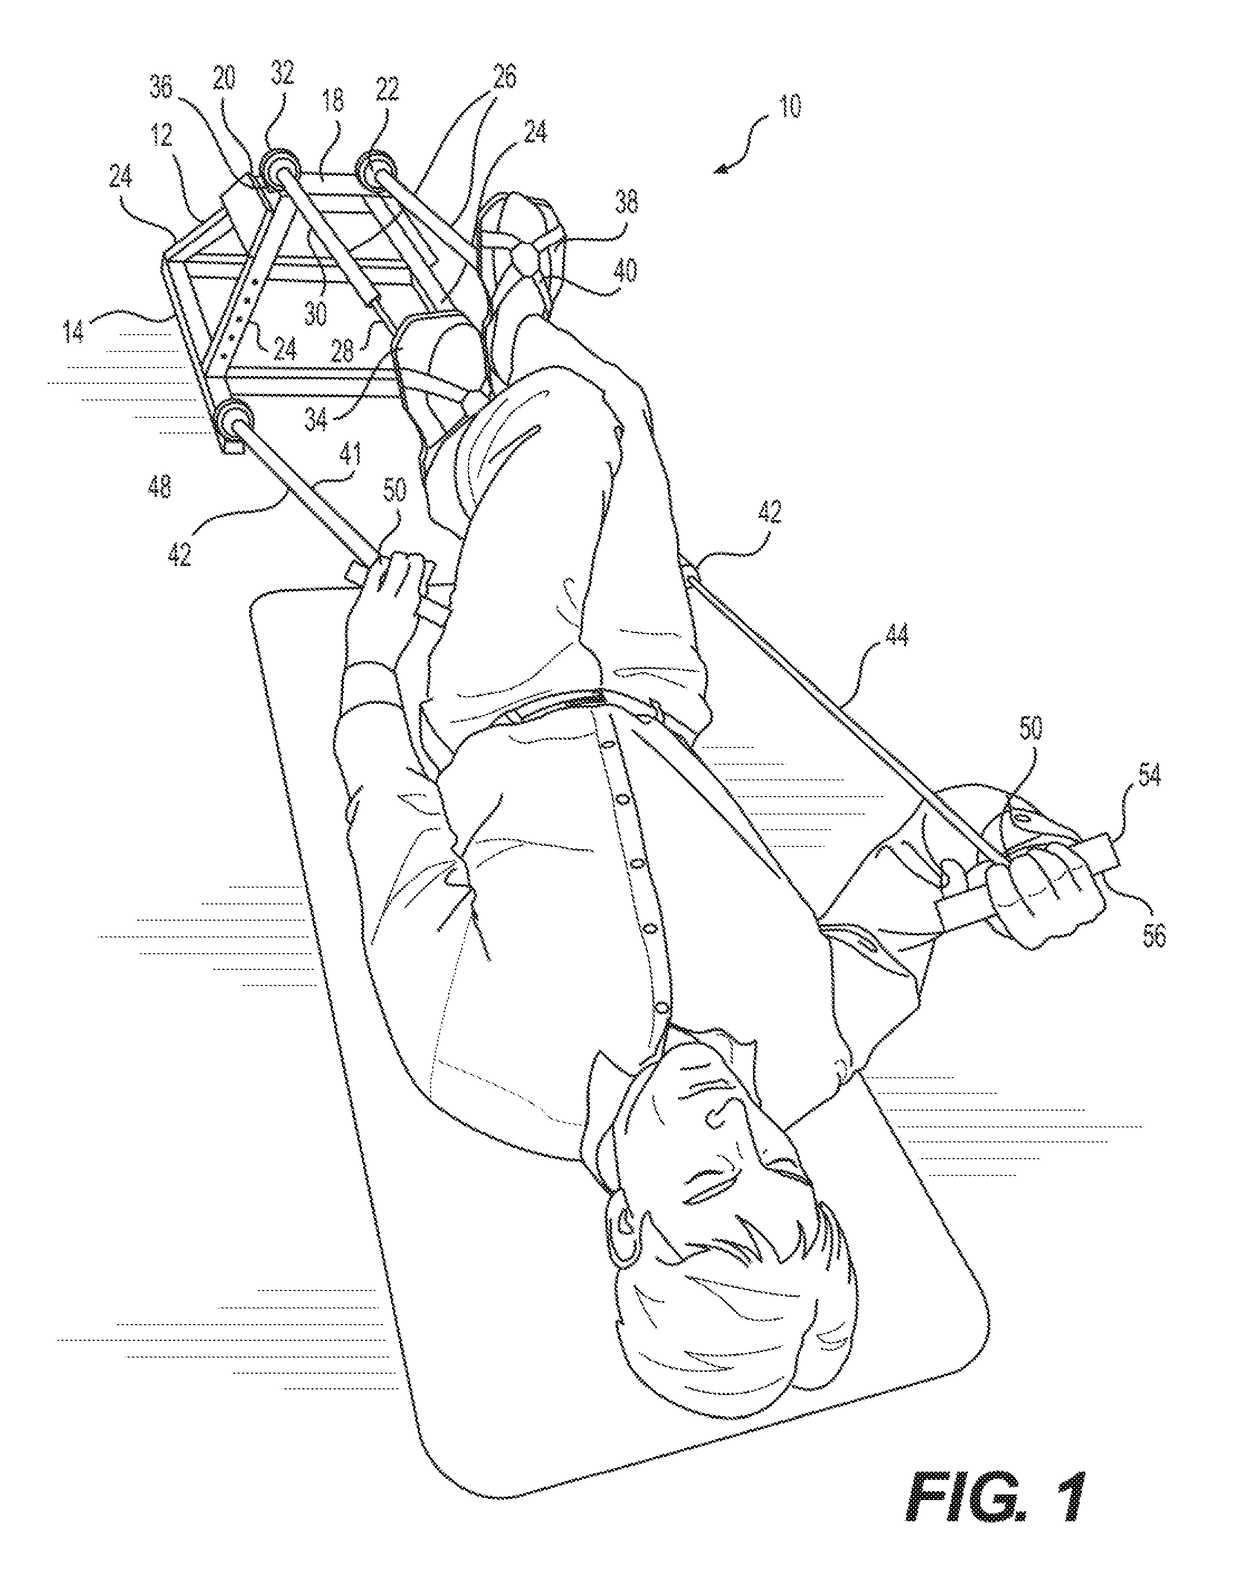 Multi-degree of freedom resistance exercise device